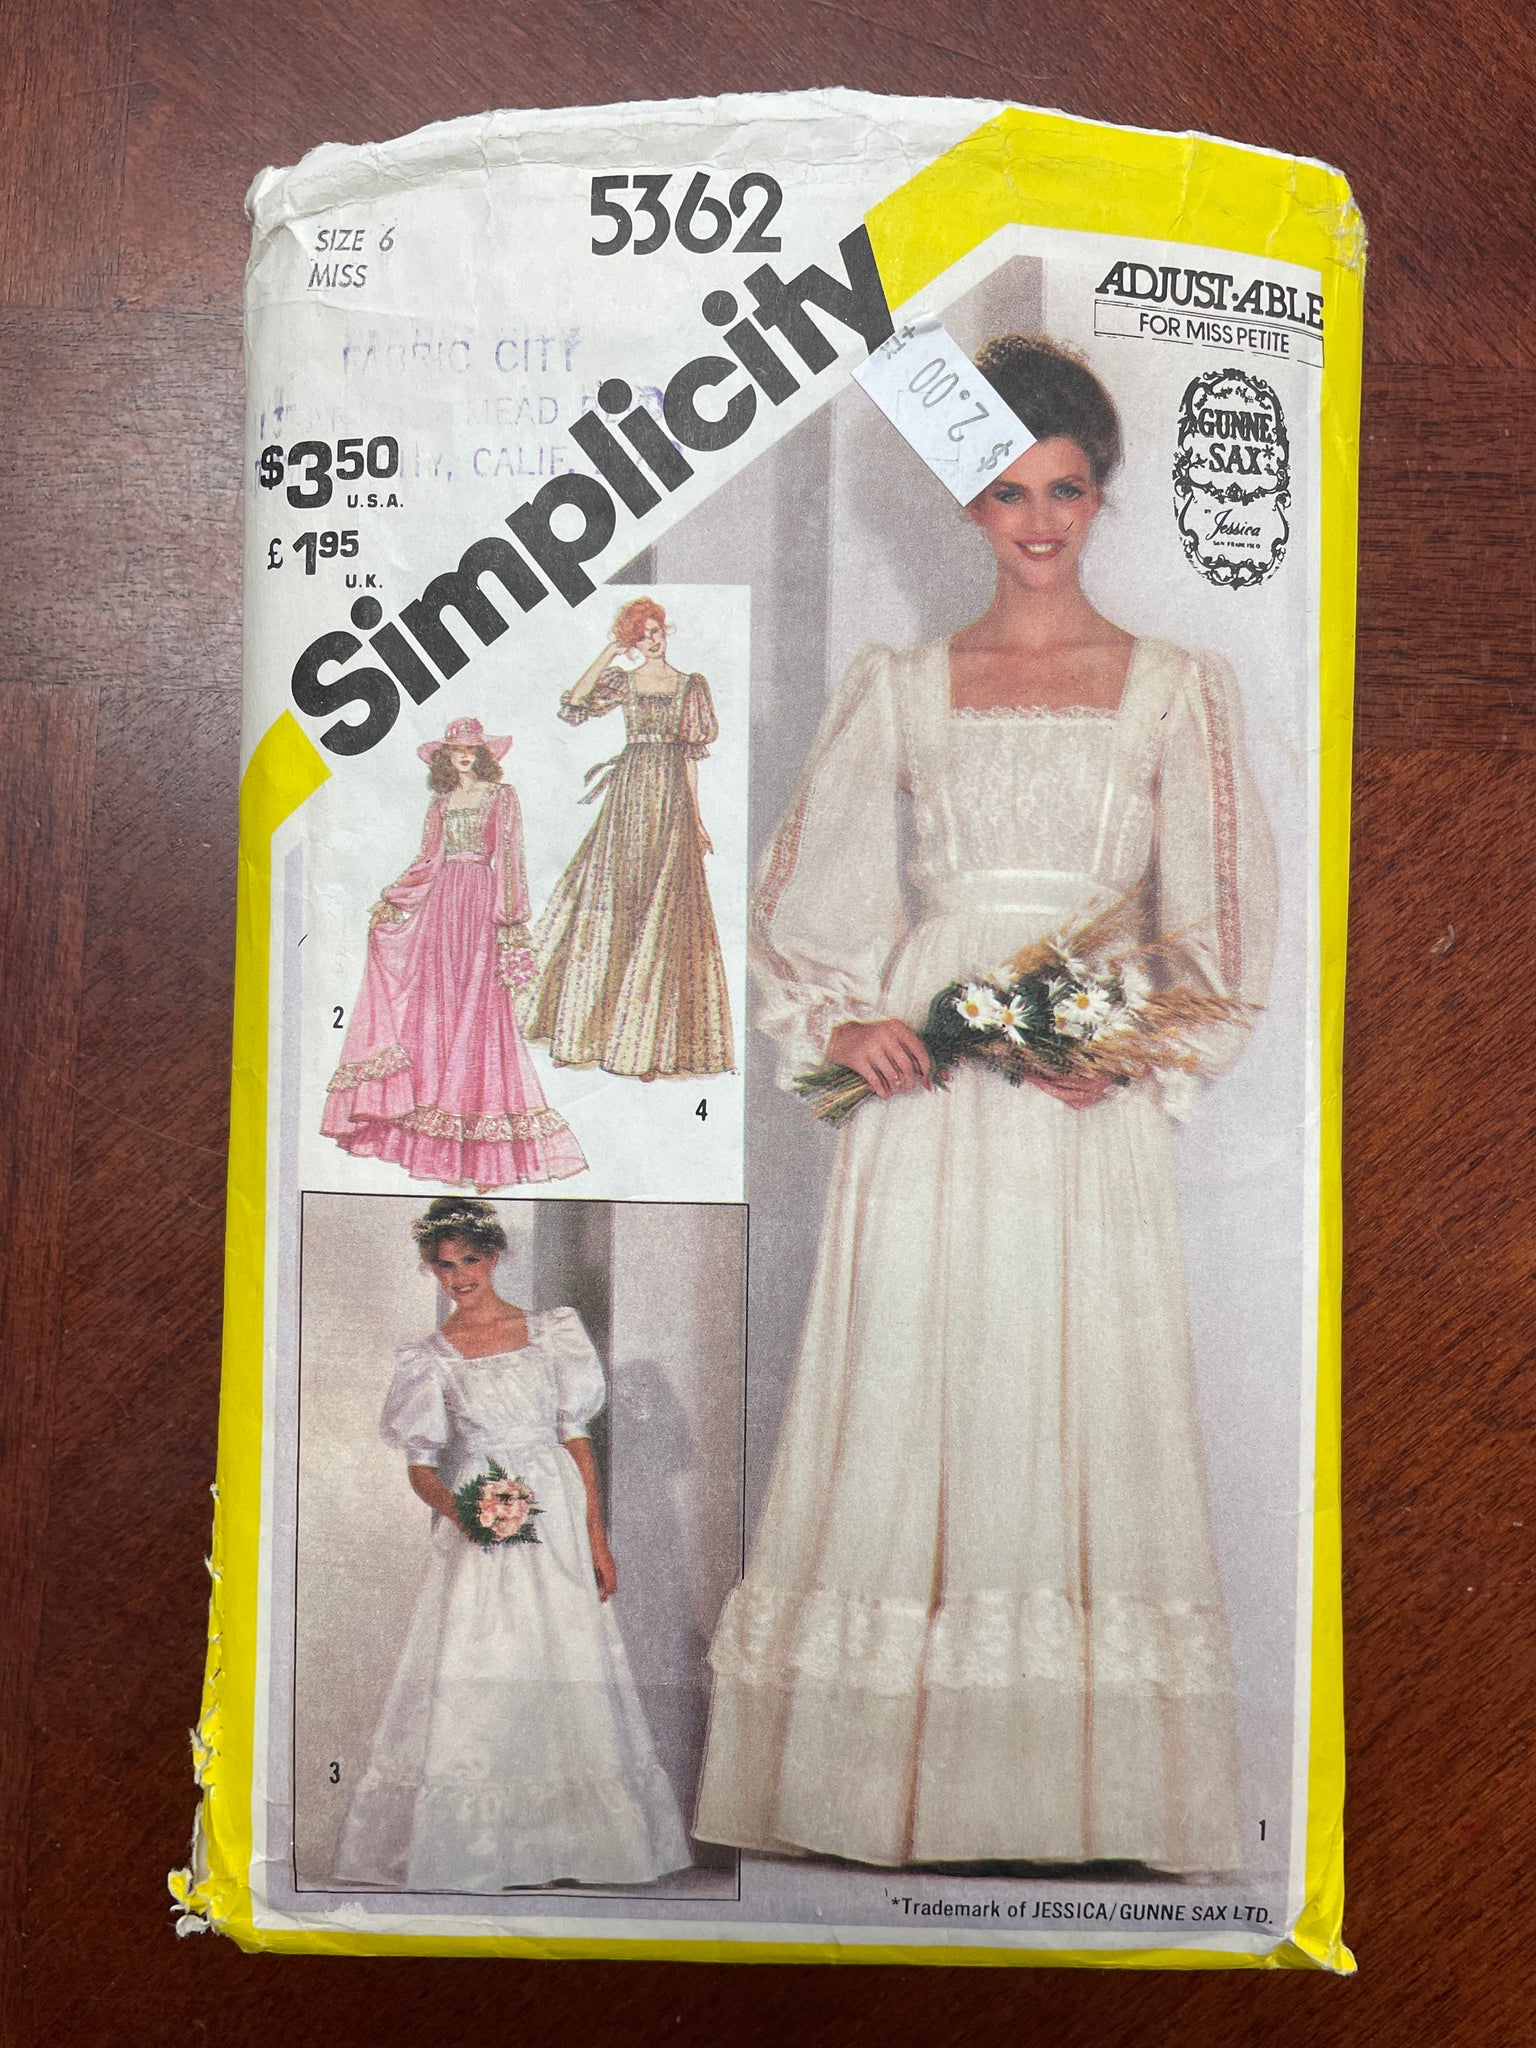 1981 Simplicity 5362 Pattern - Dress Bride and or Bridesmaids